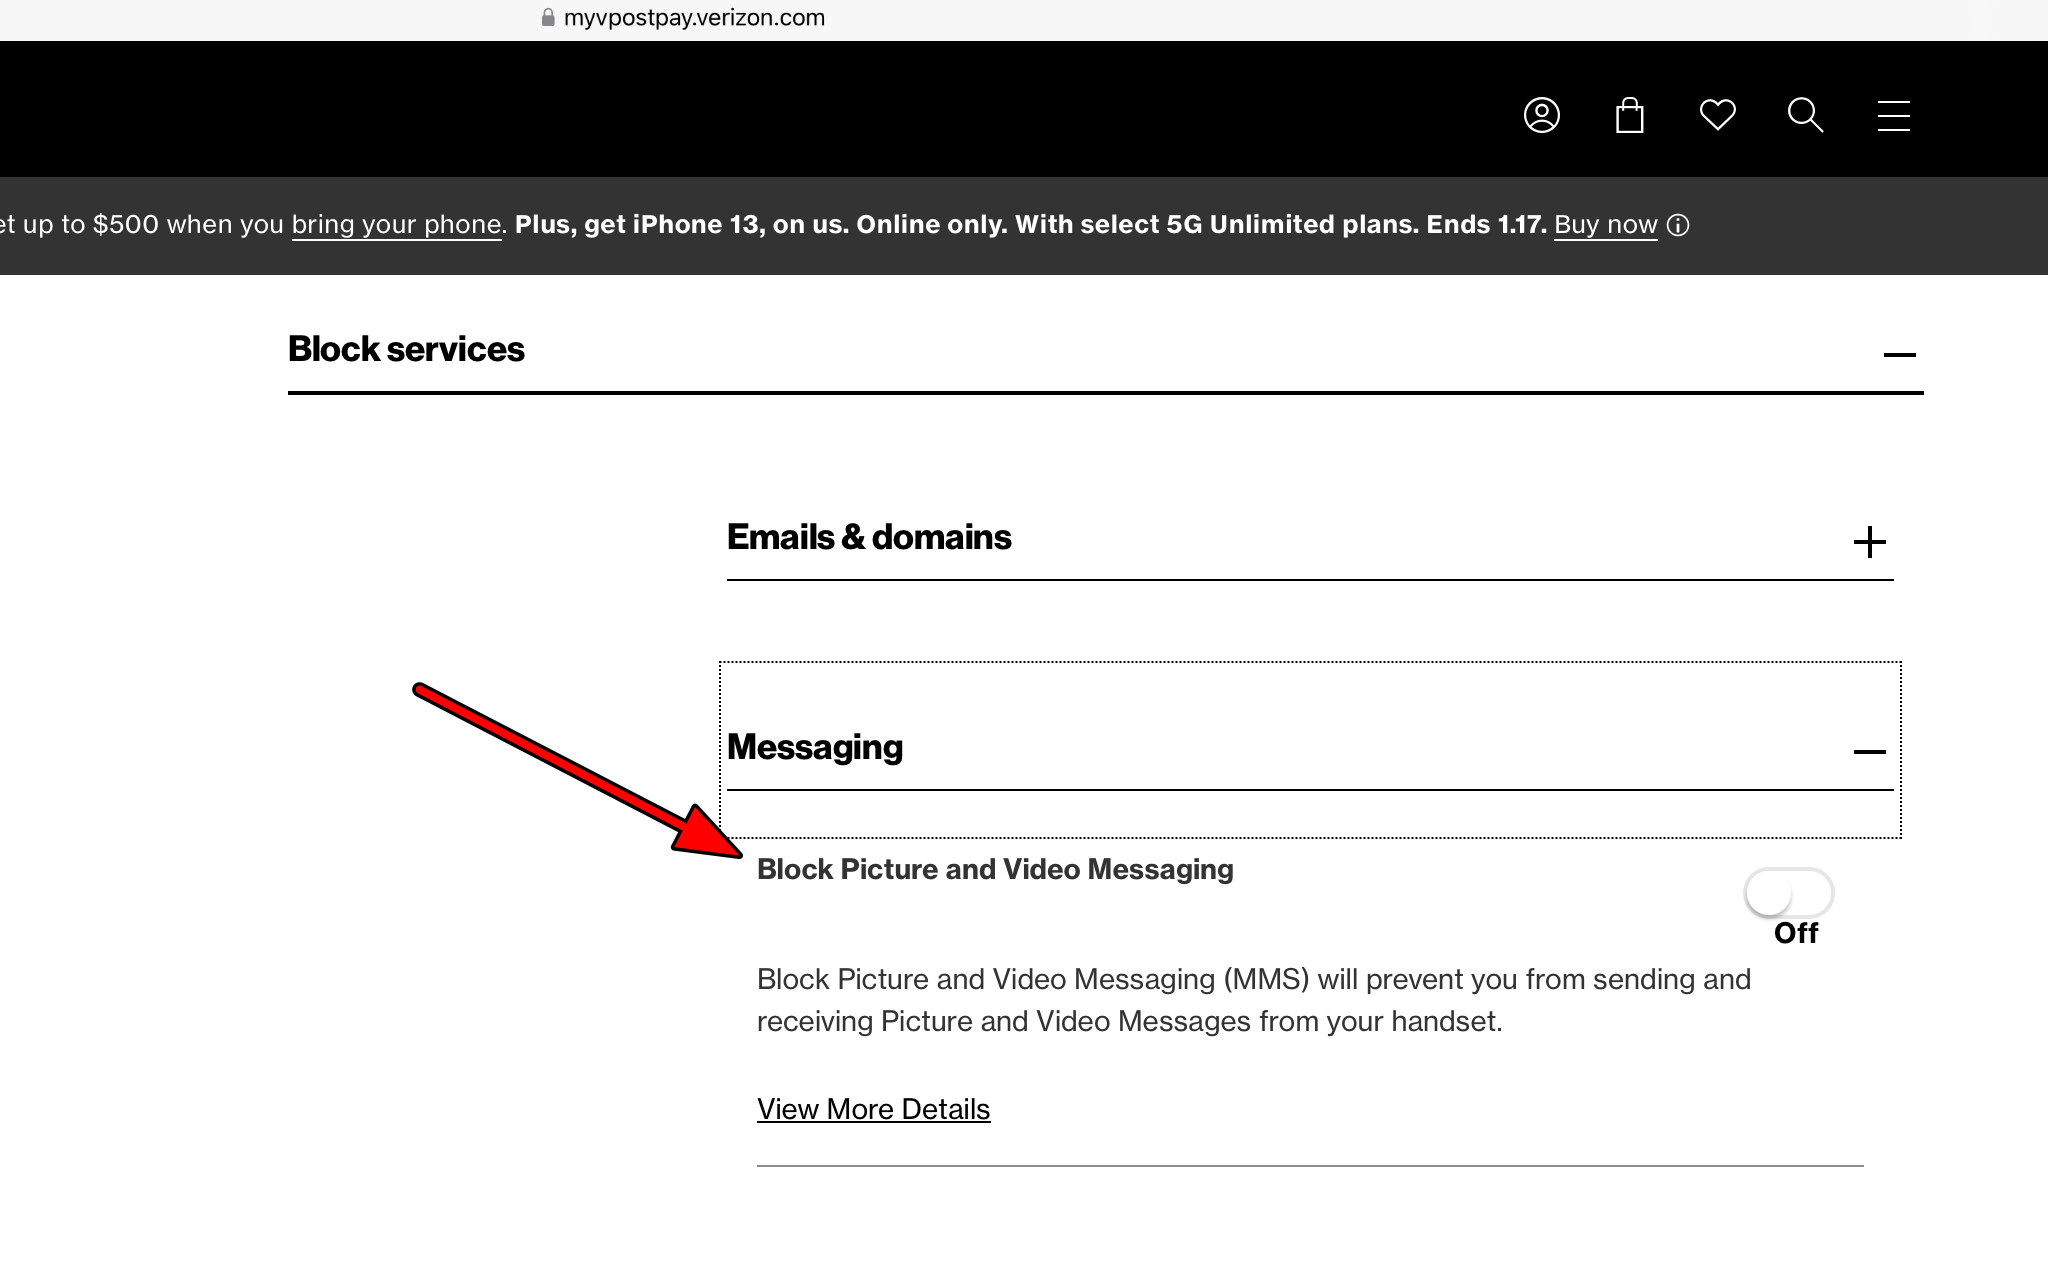 Enable and Disable Block Picture and Video Messaging on the Verizon Website